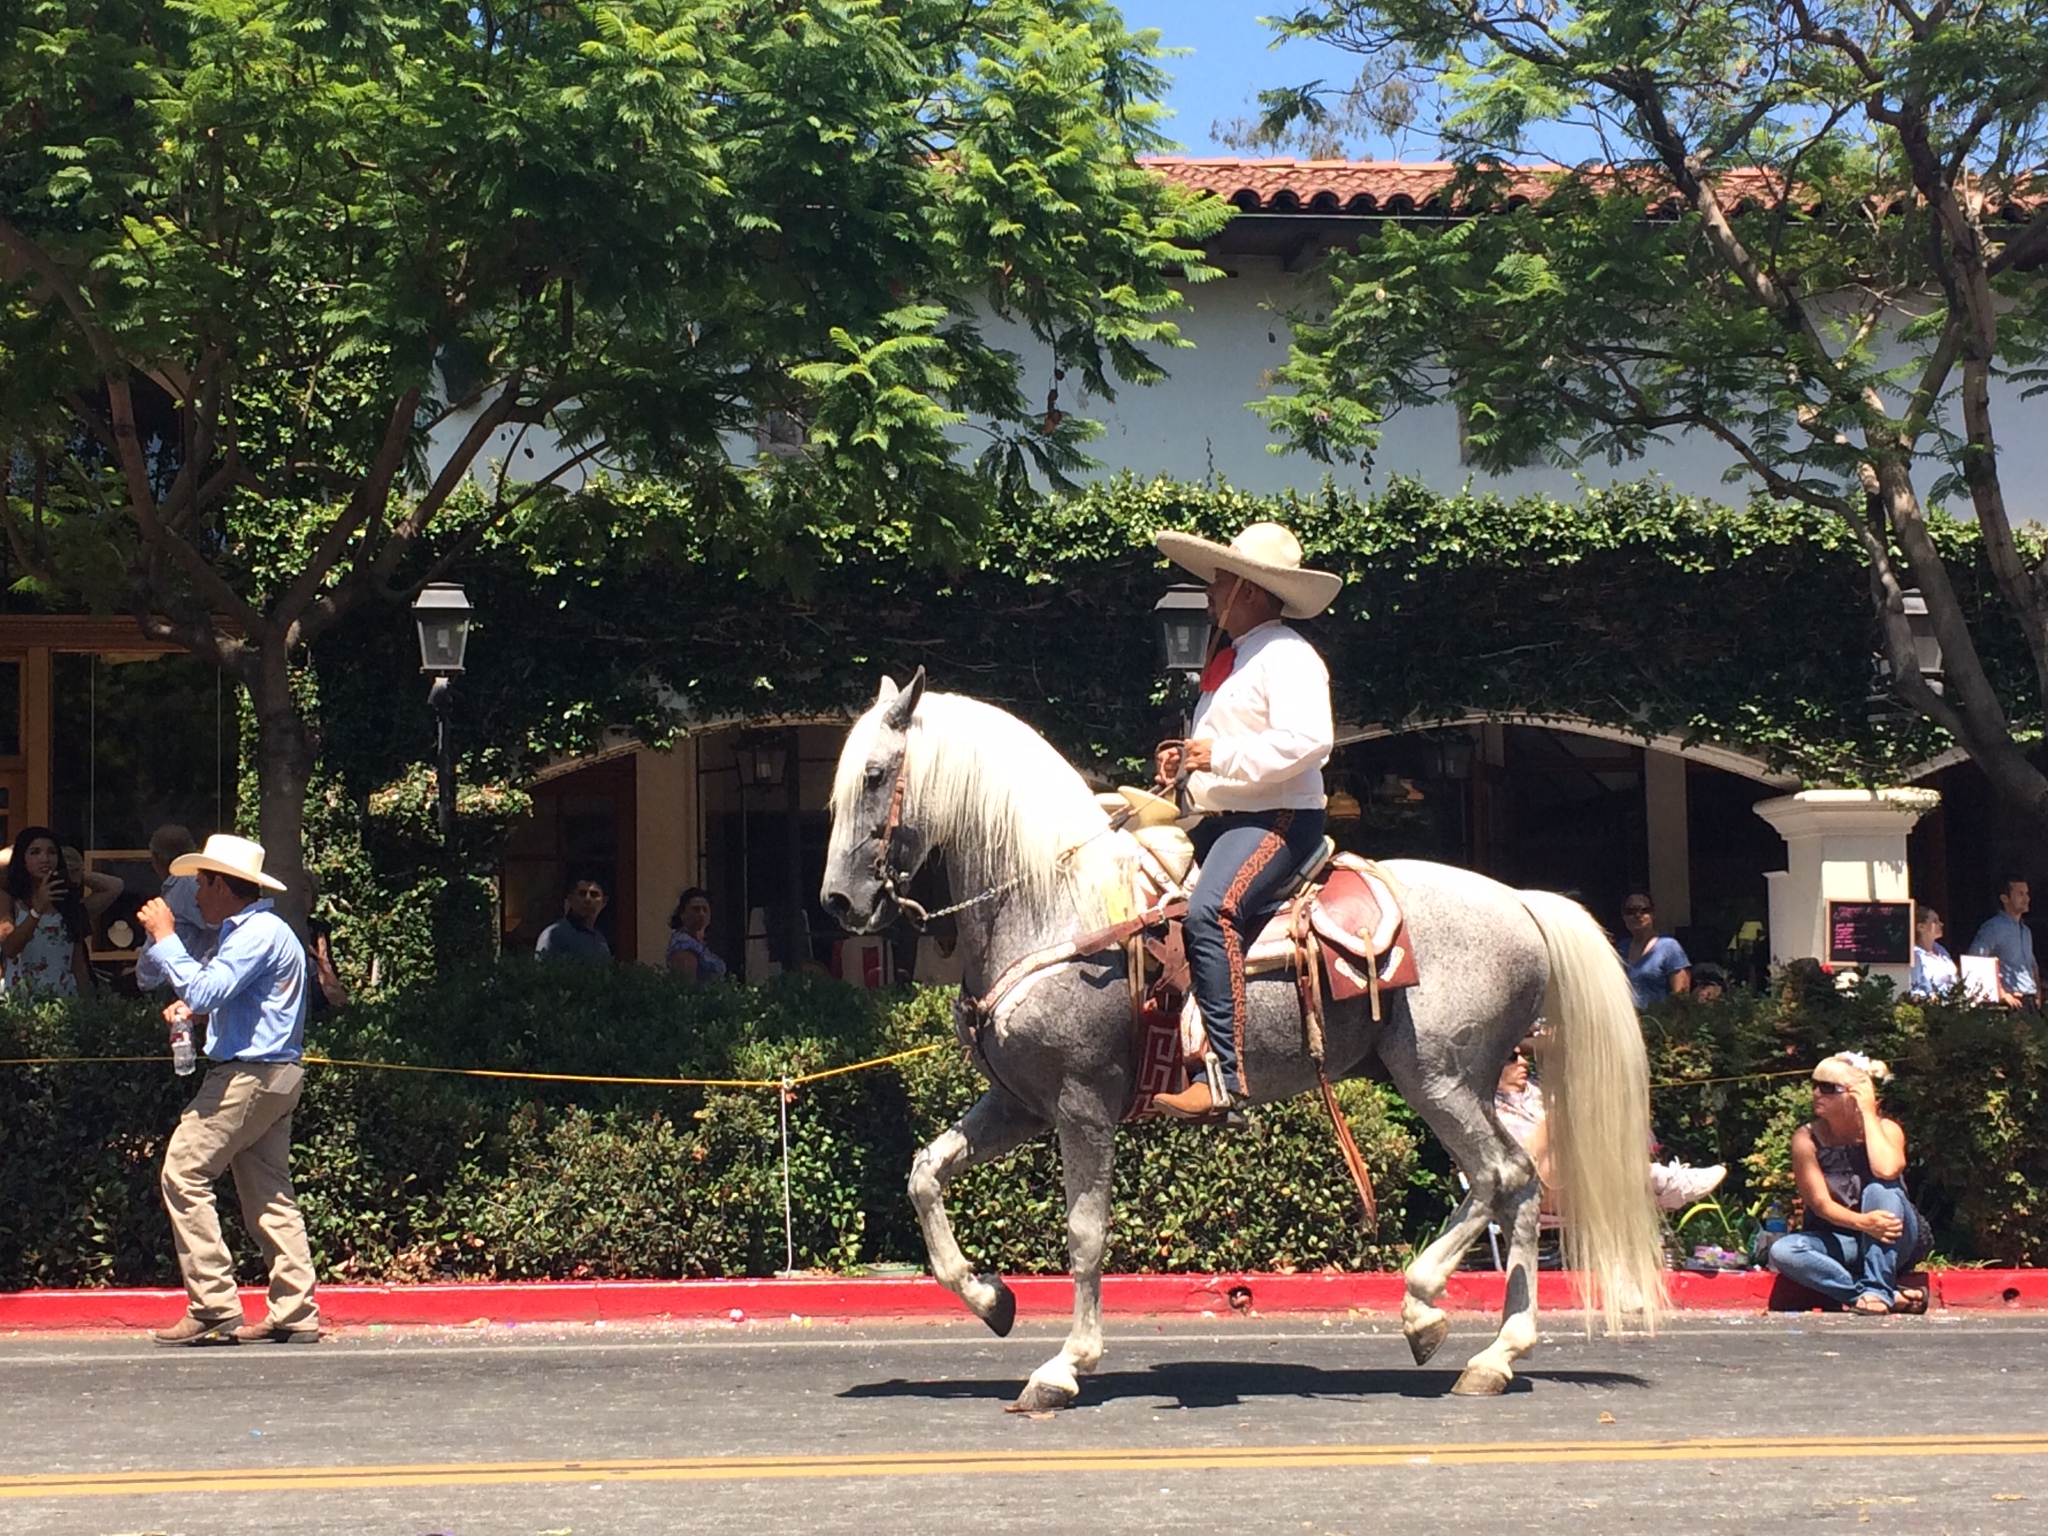 Ranchero horseback rider on State Street in the largest horse parade in North America during La Fiesta